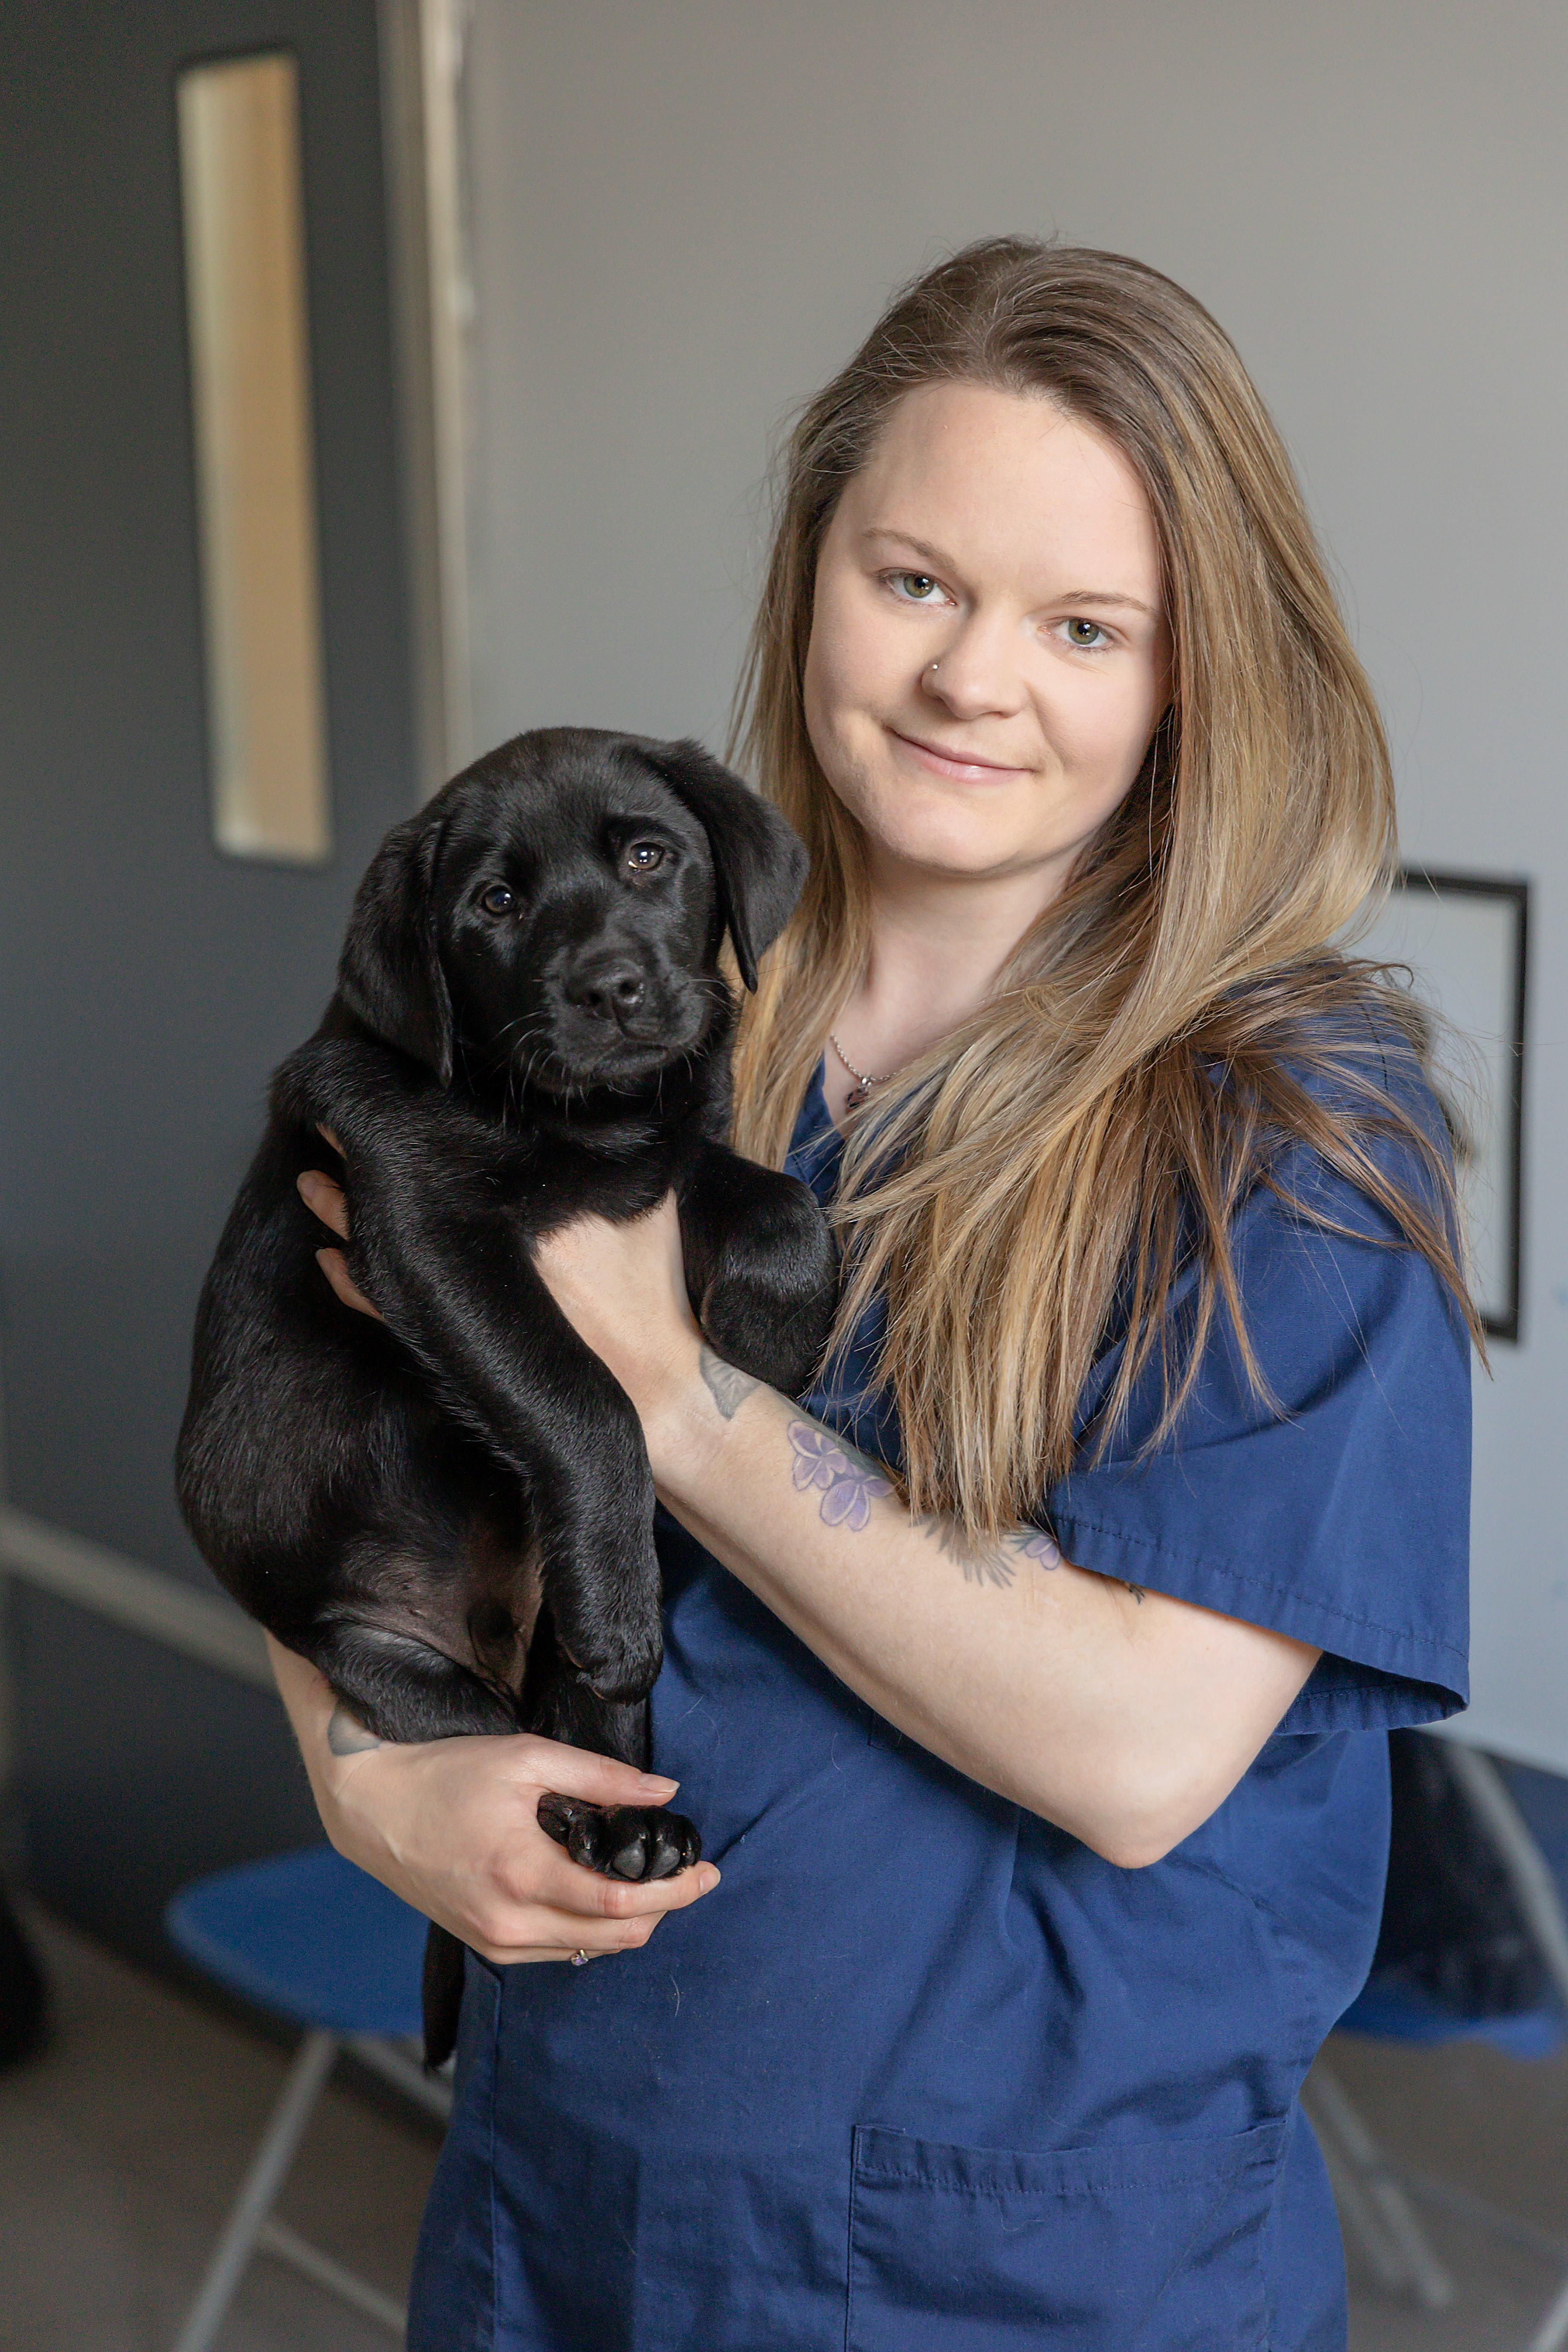 Becky Hunt holds a black labrador puppy in her arms.